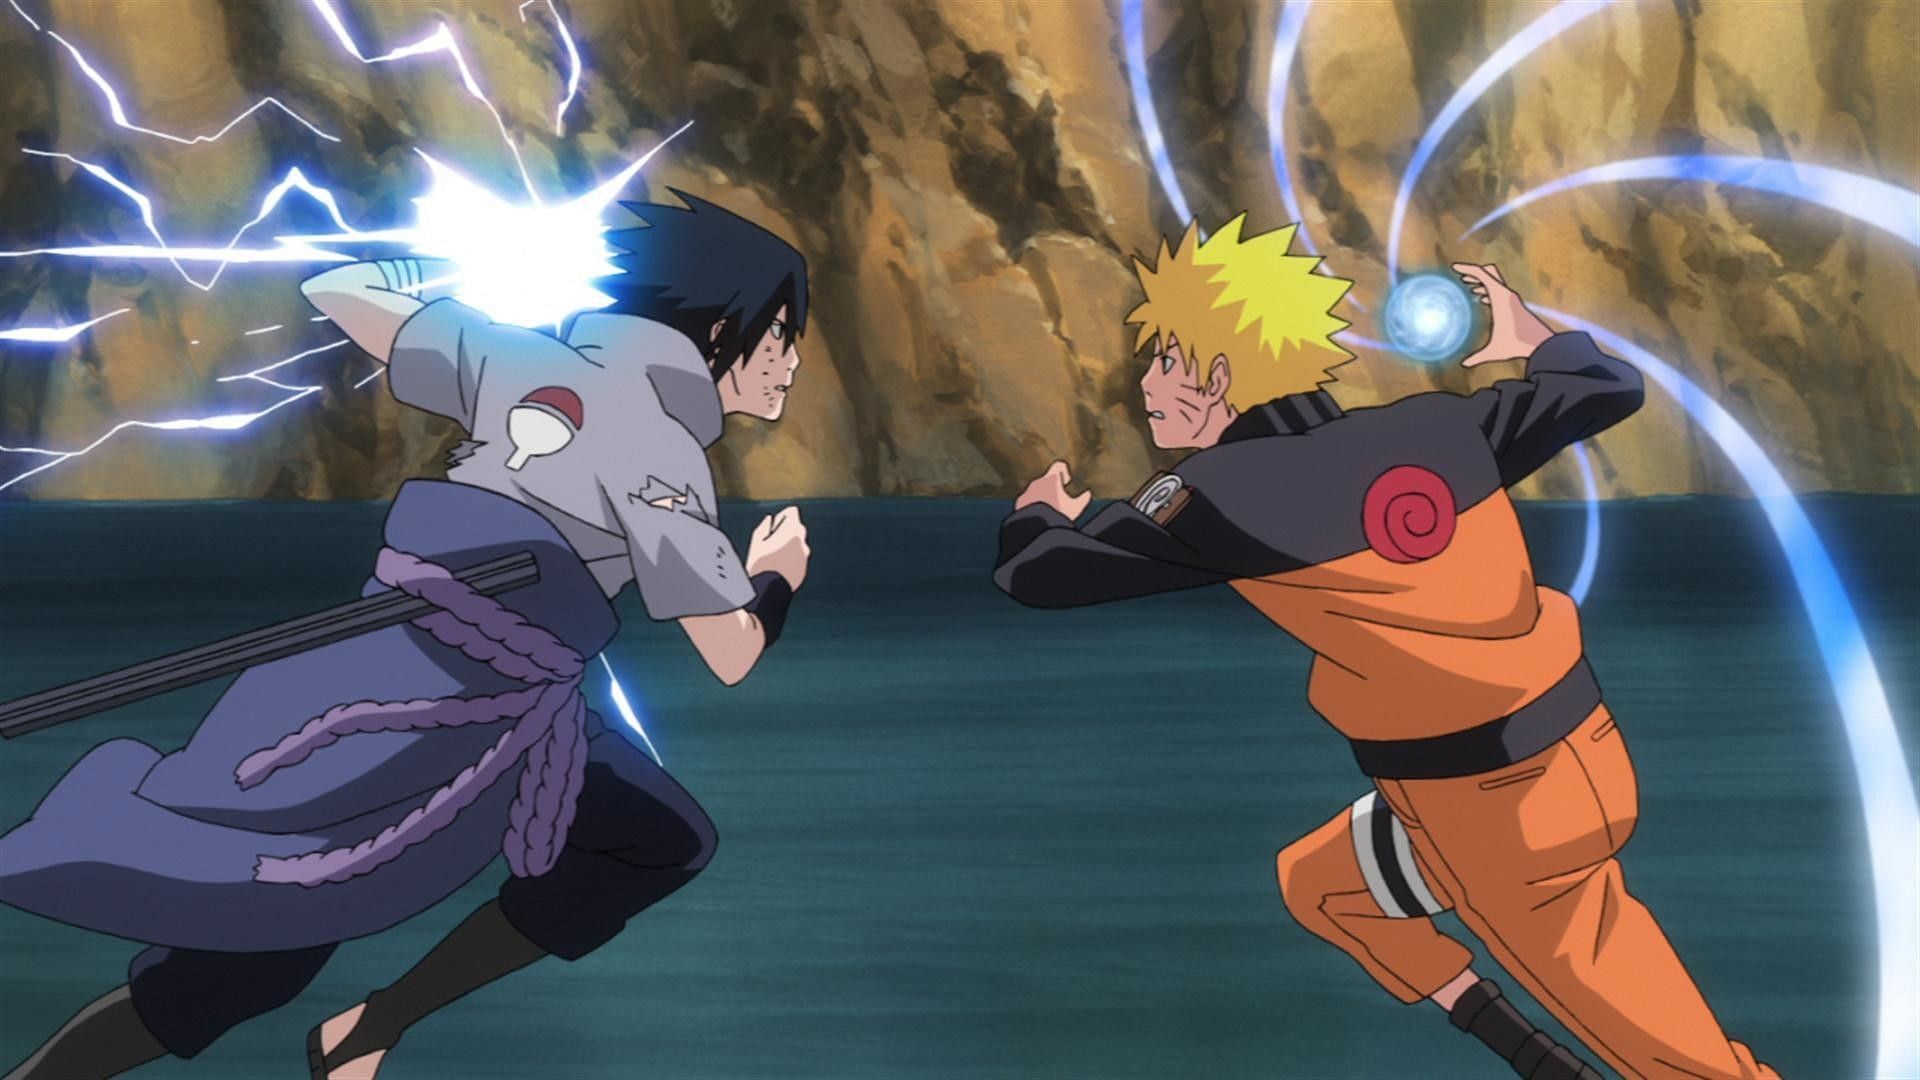 When did Naruto come out? The release of the manga and anime, explained